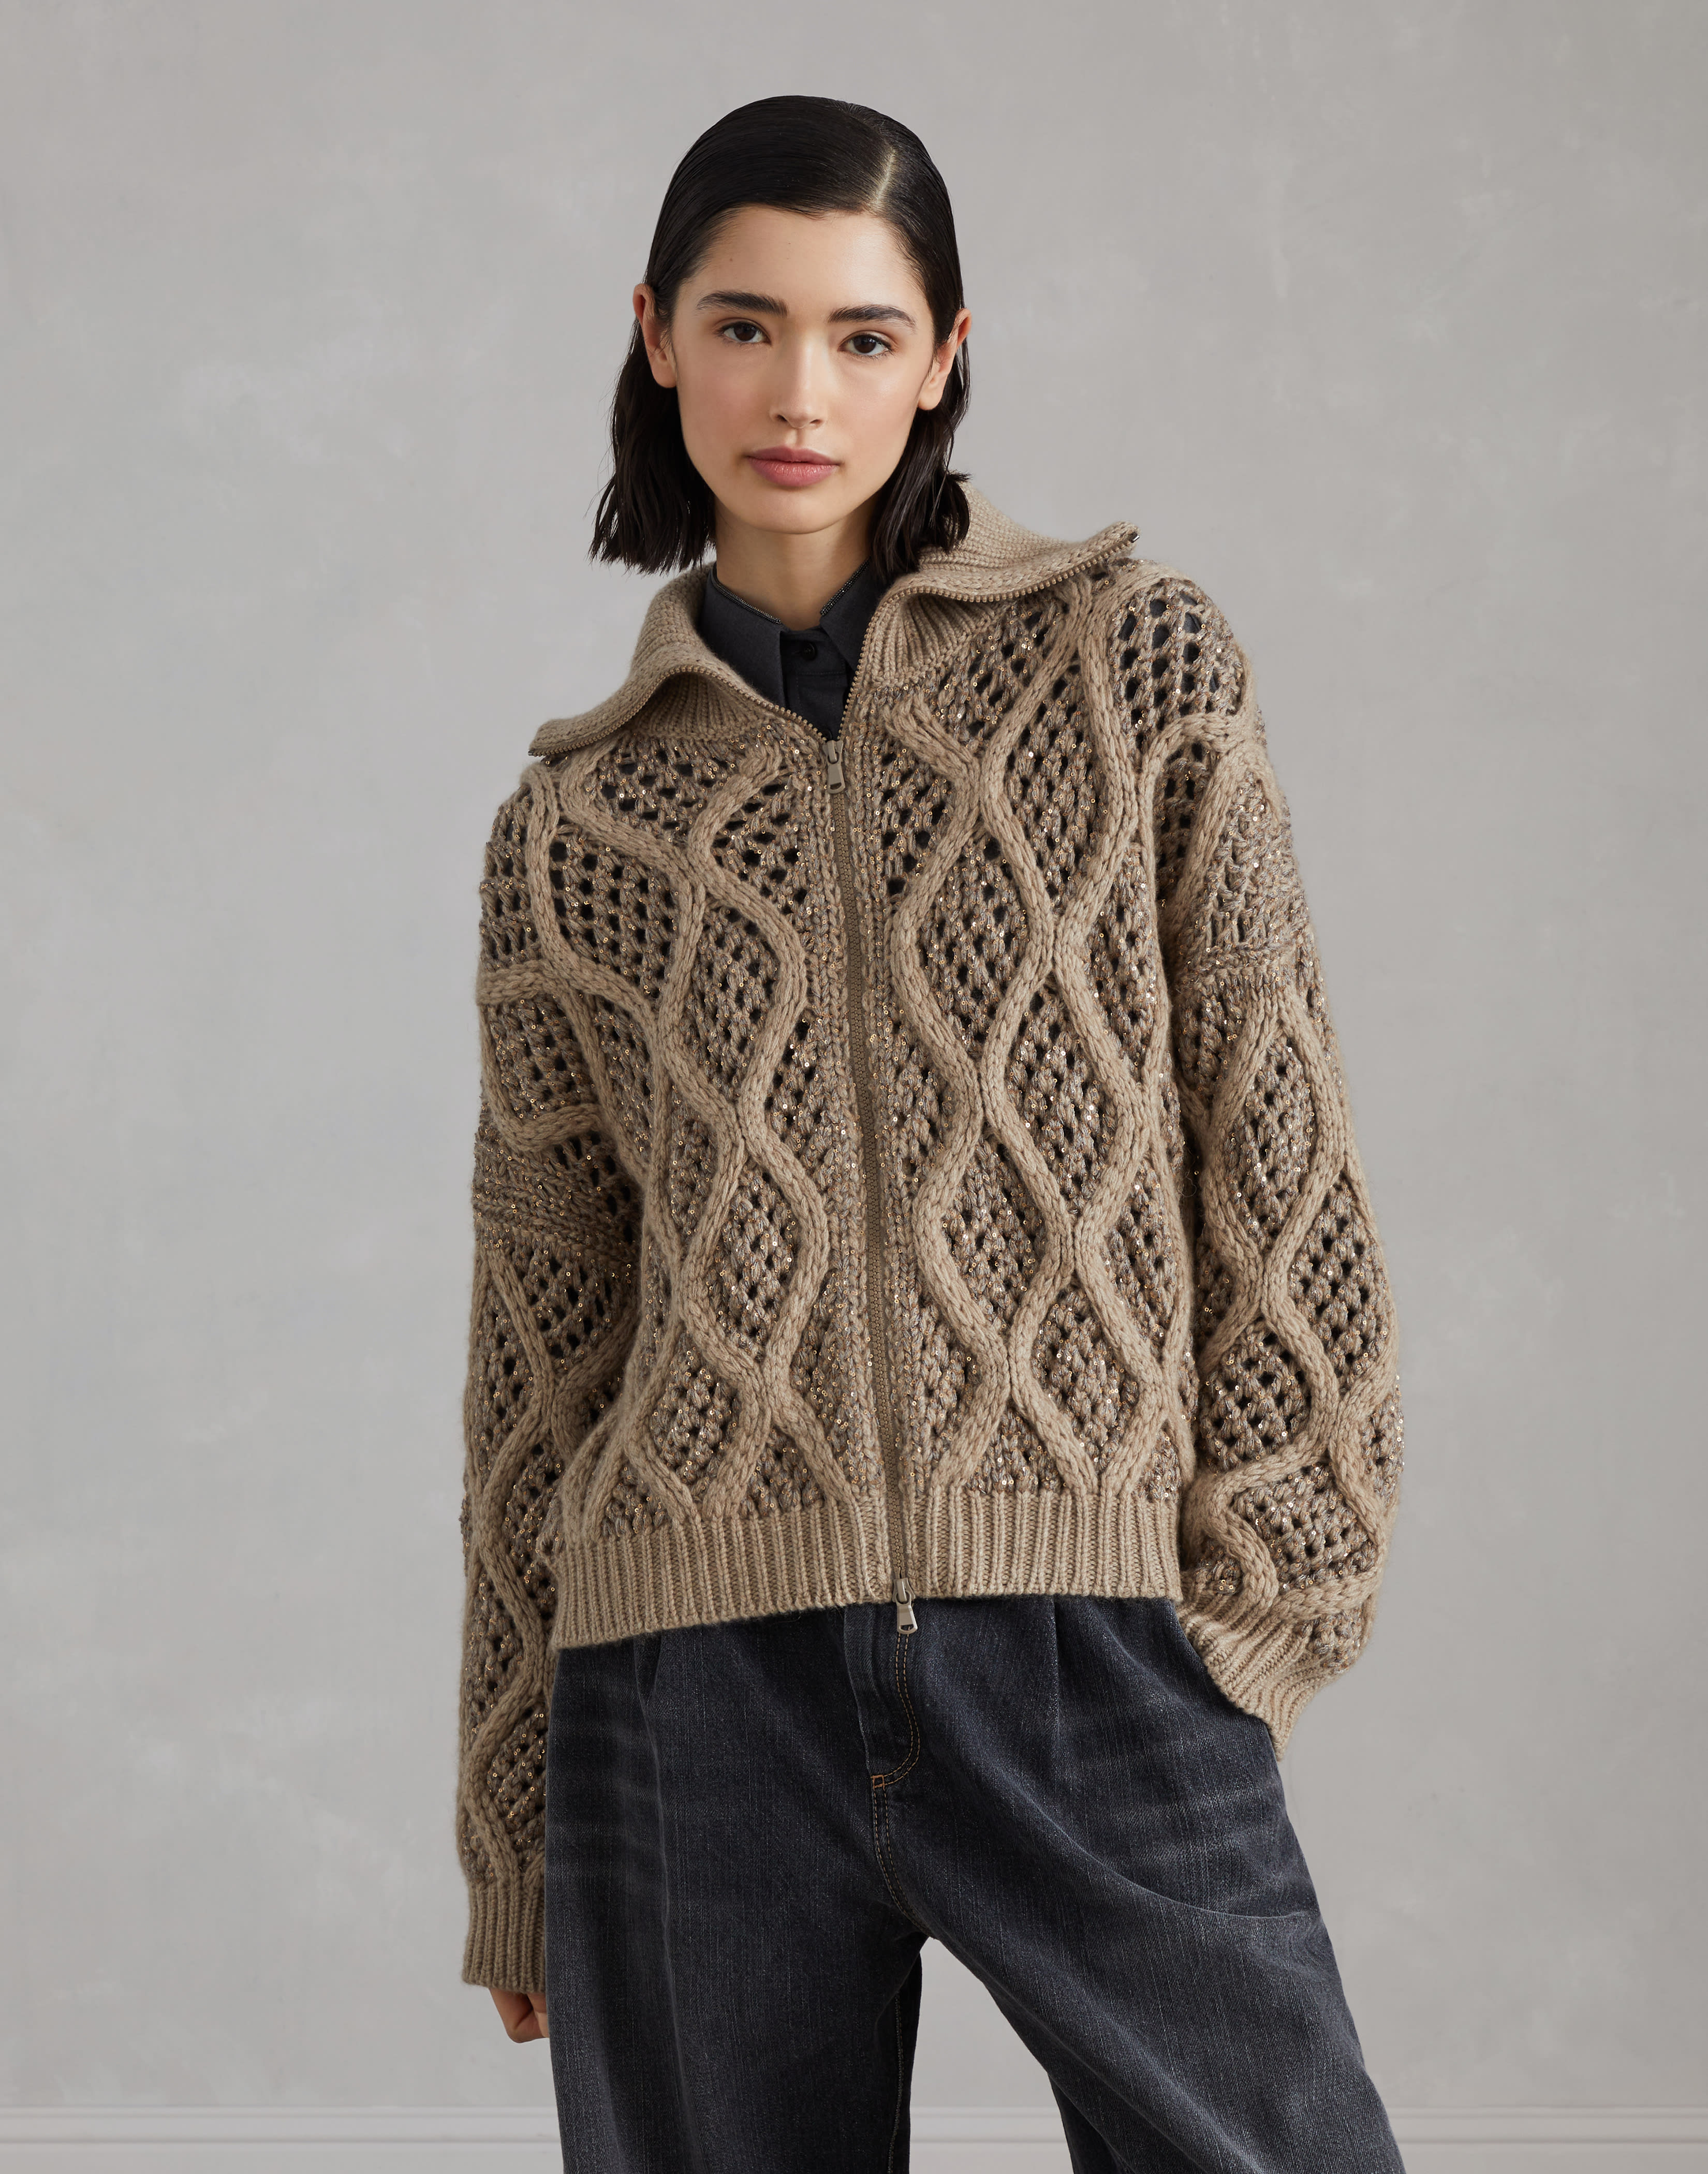 Dazzling Net & Cable cardigan